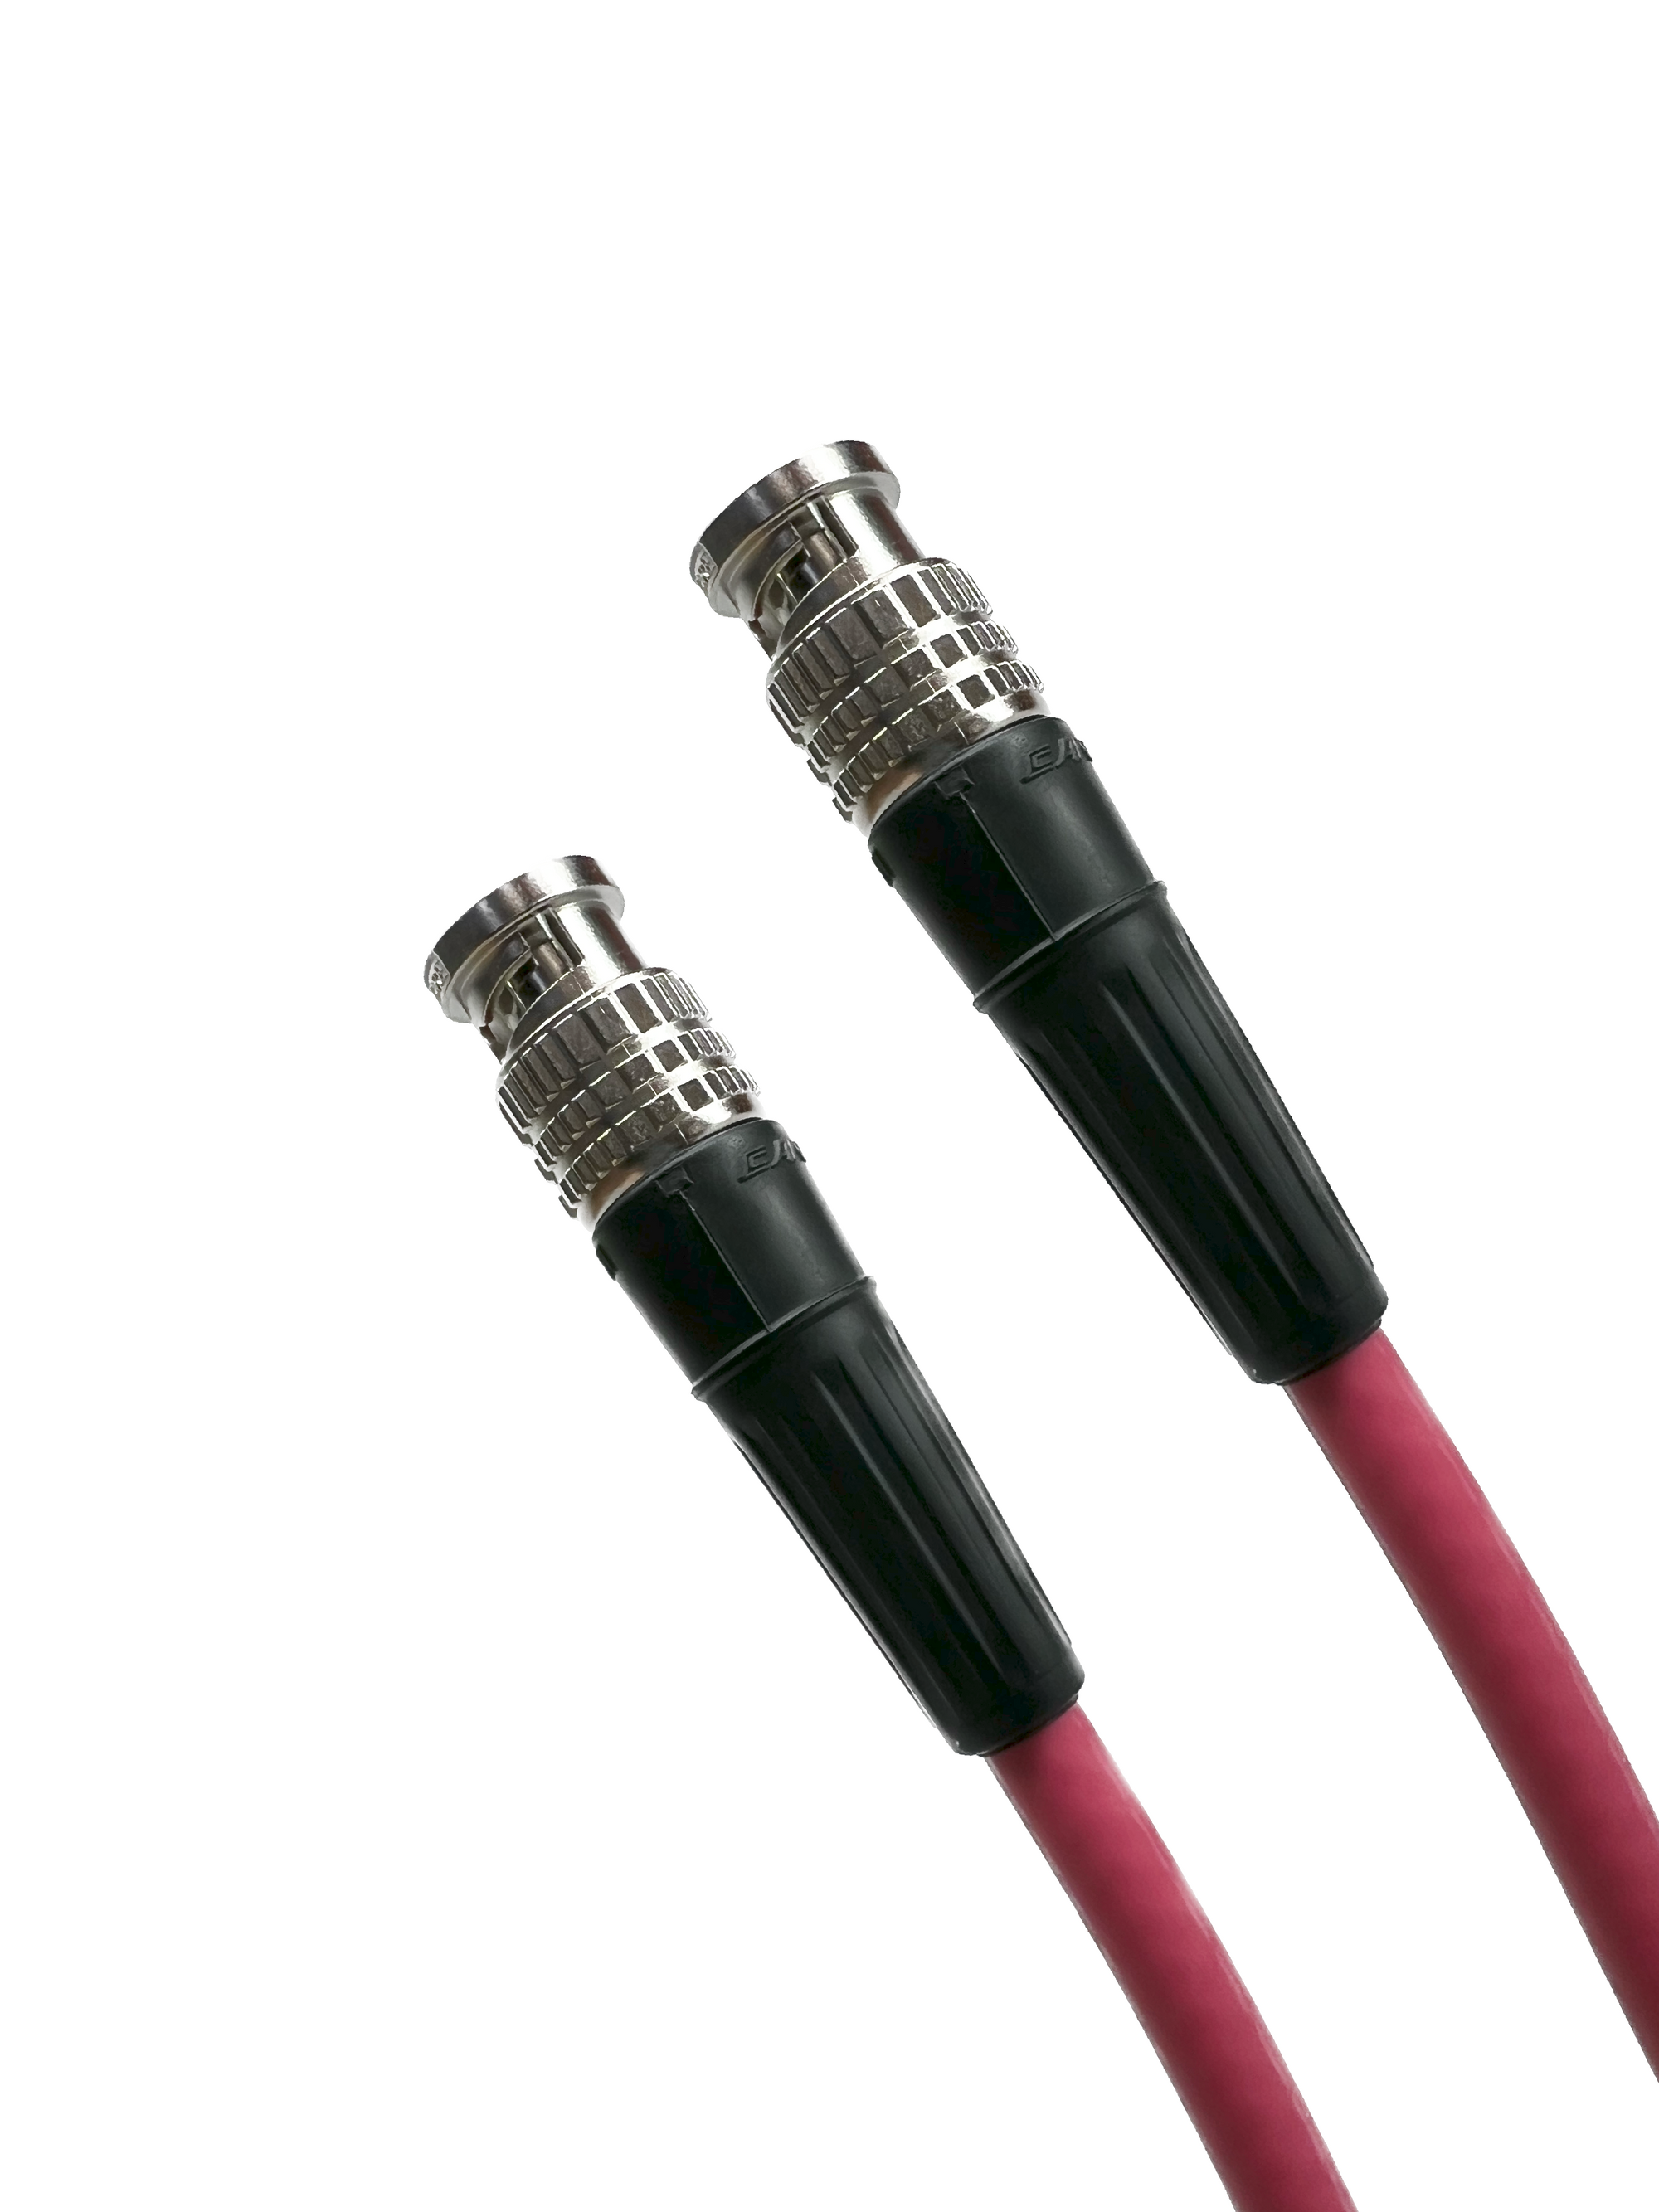 Belden 1694A 3G/6G HD-SDI RG6 BNC Cable with Canare BCP-B53 BNC Connec -  Custom Cable Connection